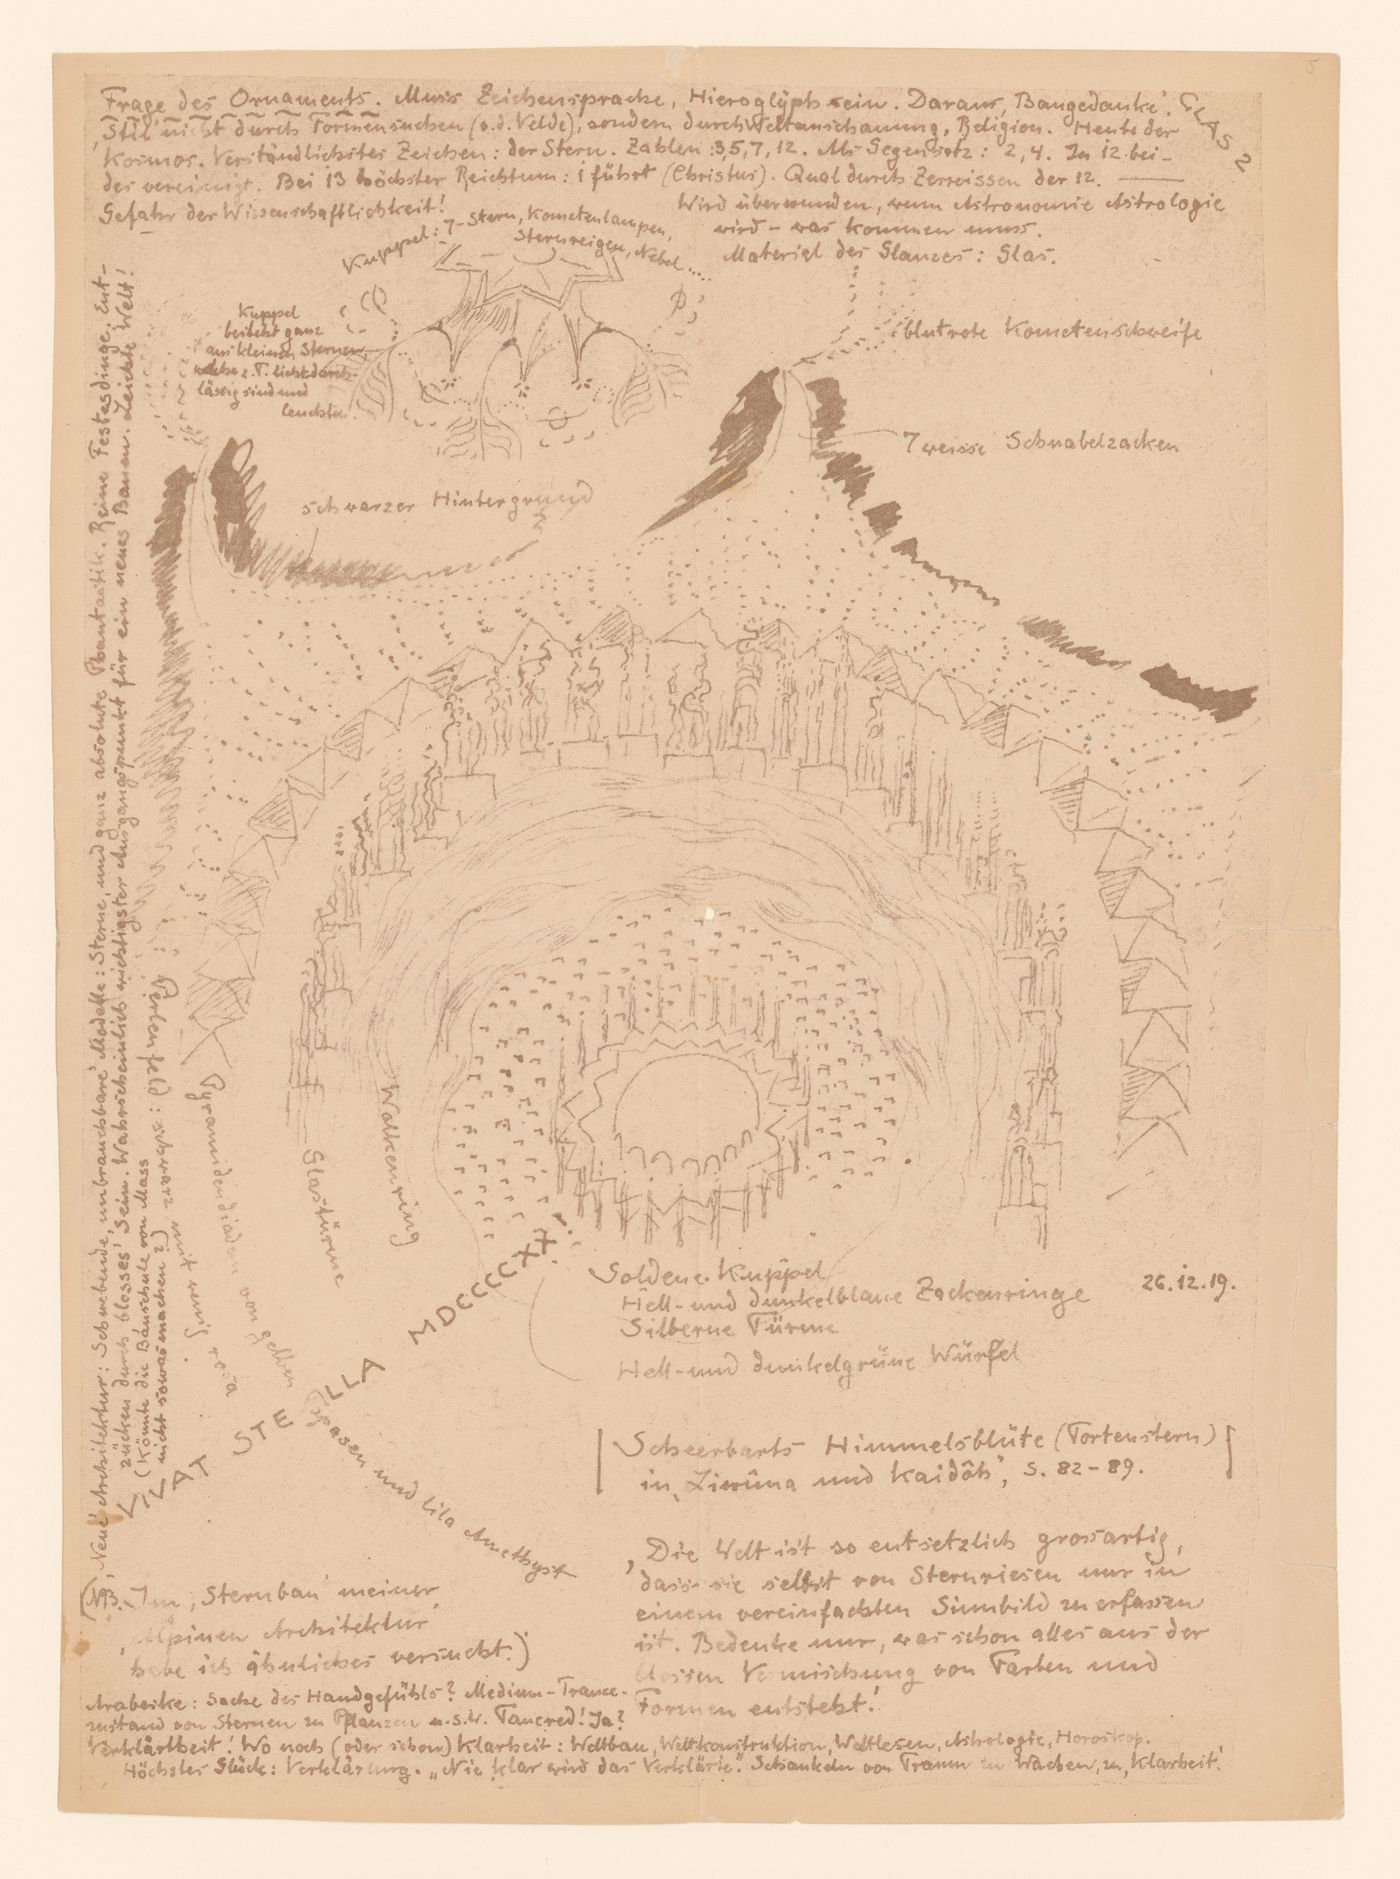 Illustrated letter with a drawing by Bruno Taut